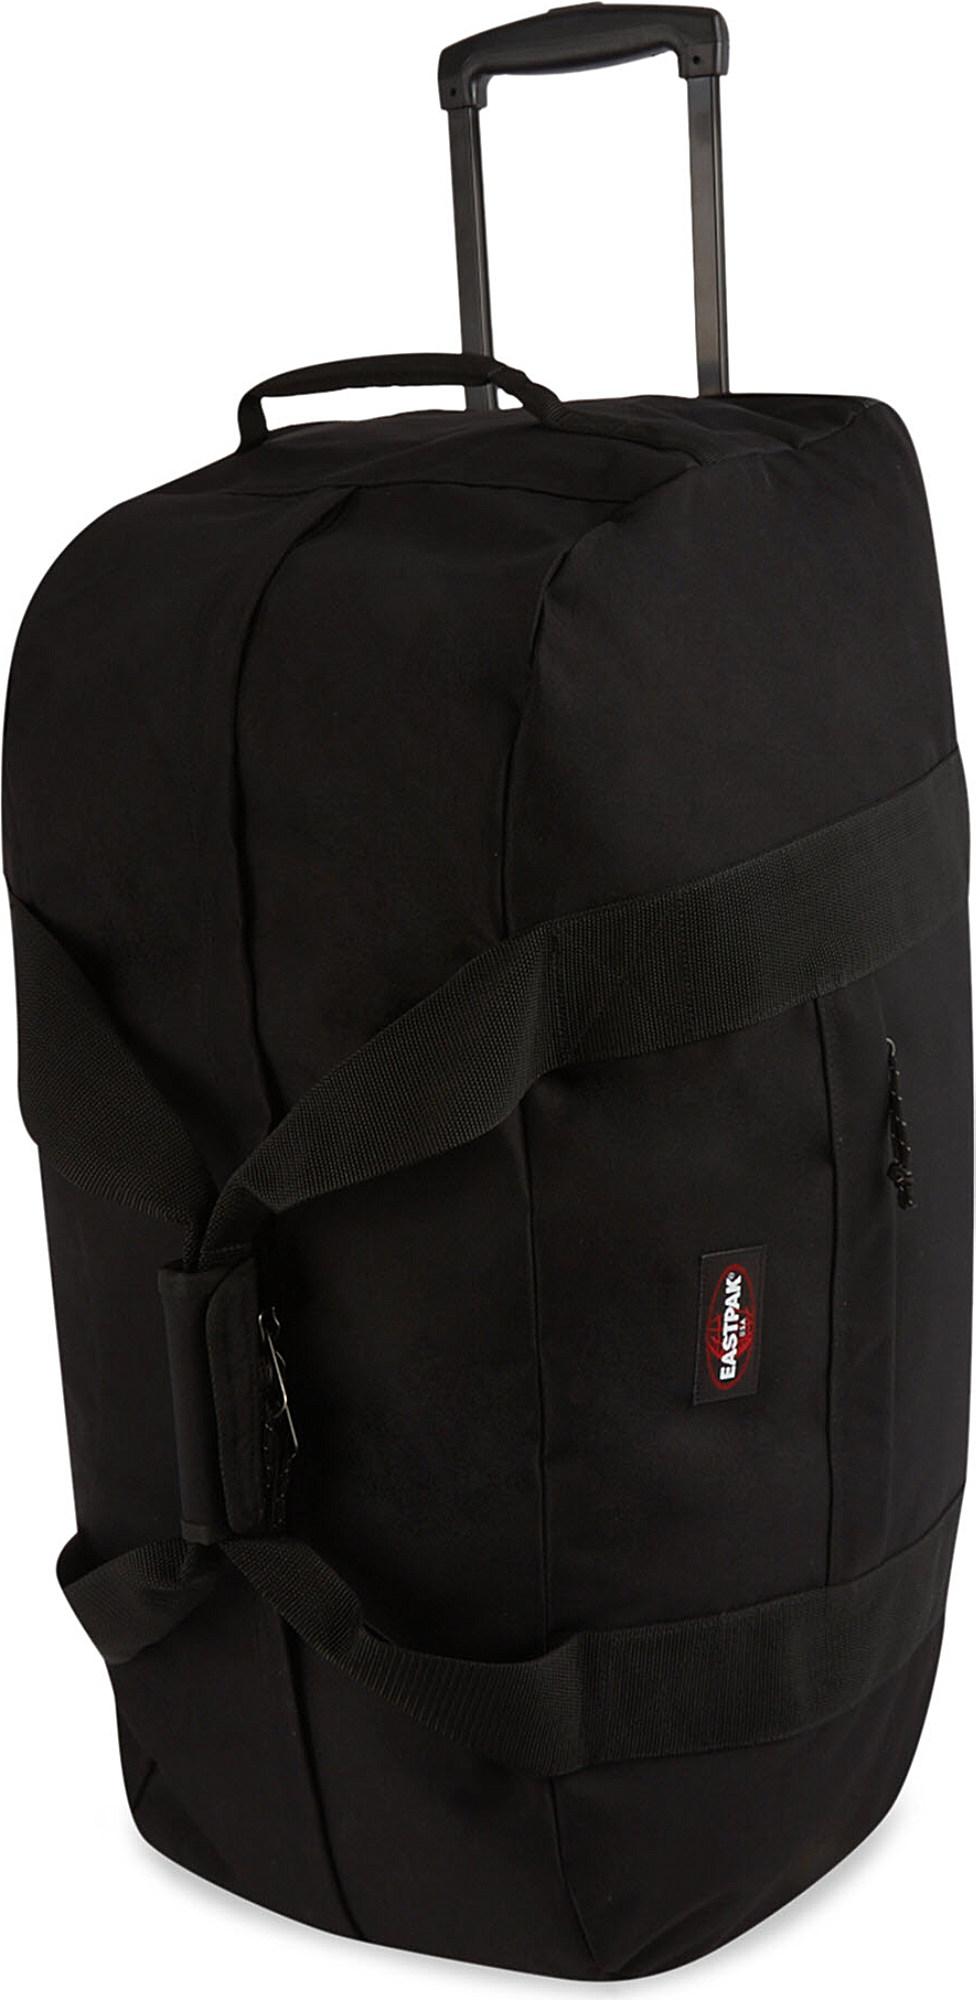 Lyst - Eastpak Container 2-wheeled Duffel Bag in Black for Men